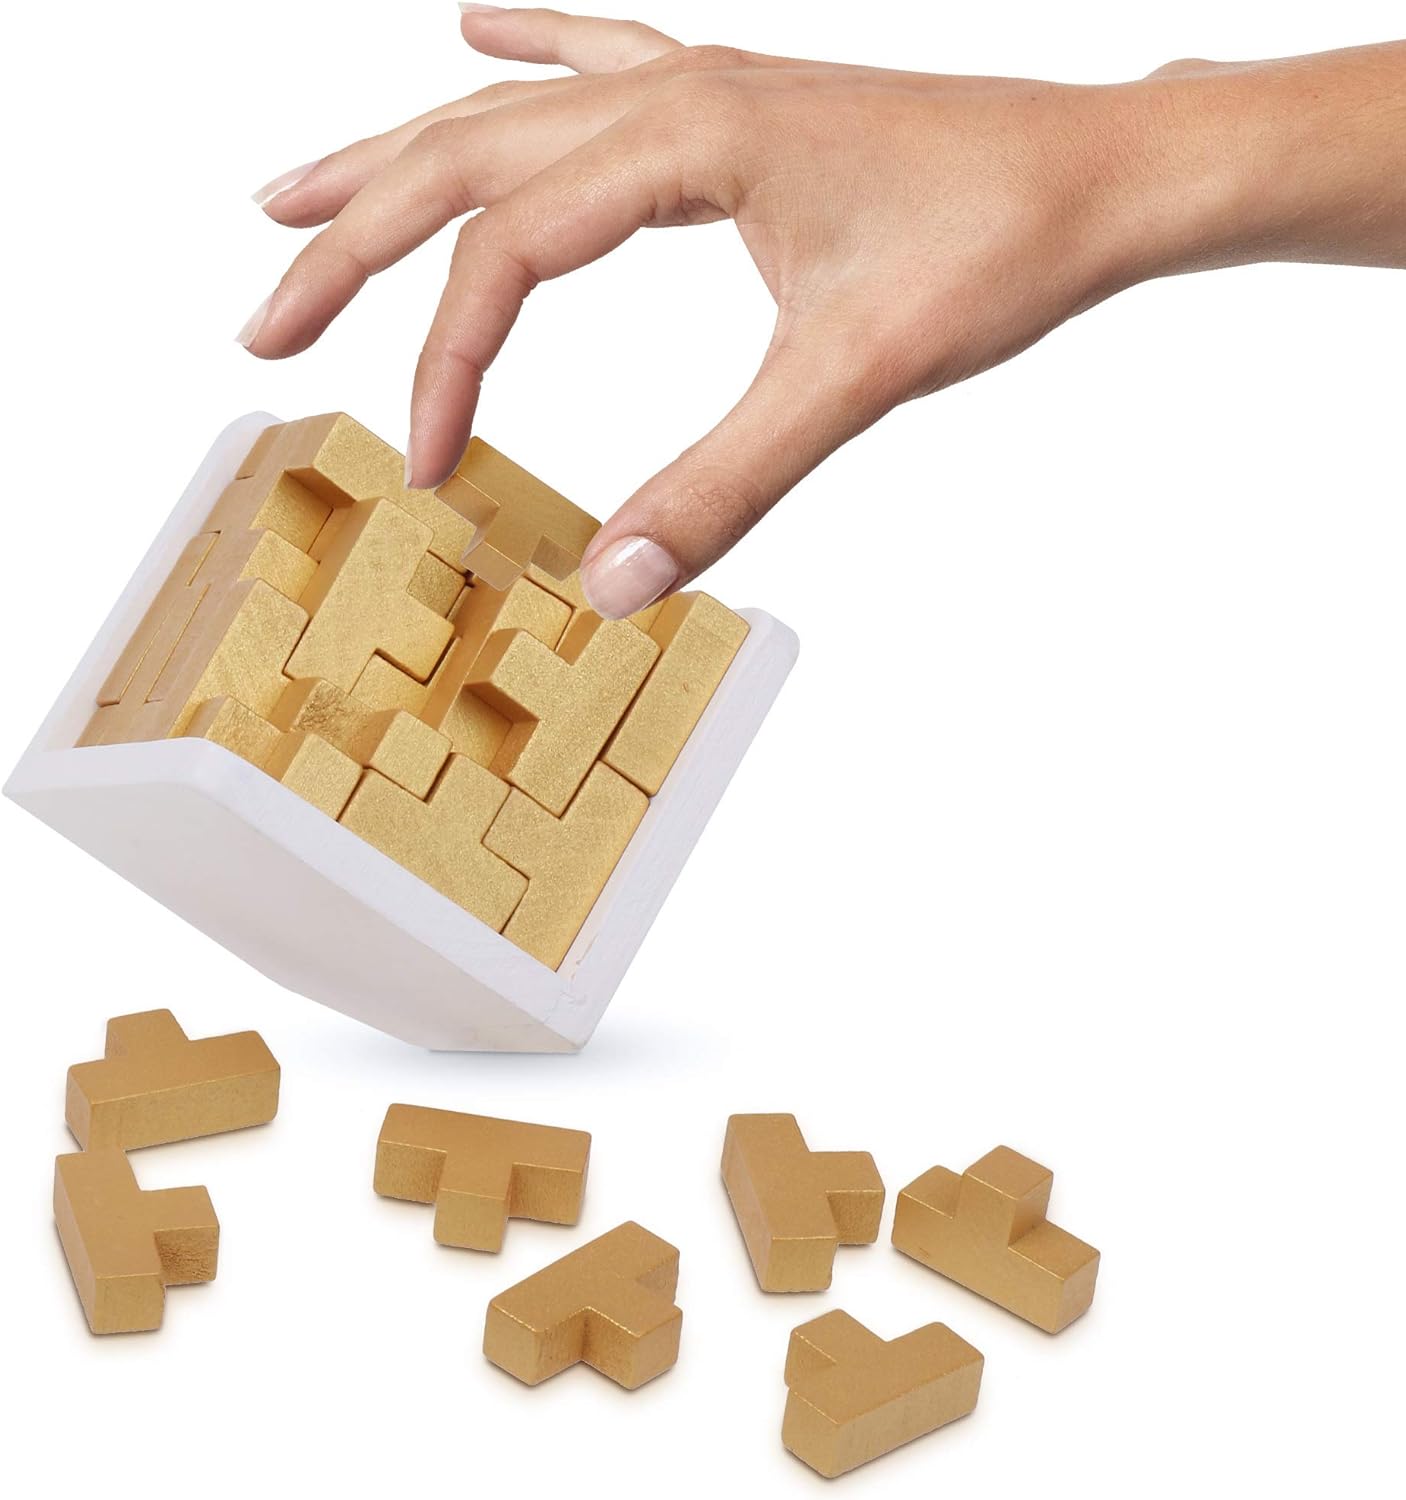 Bits and Pieces Wood Puzzles: The Ultimate Guide for Puzzle Lovers